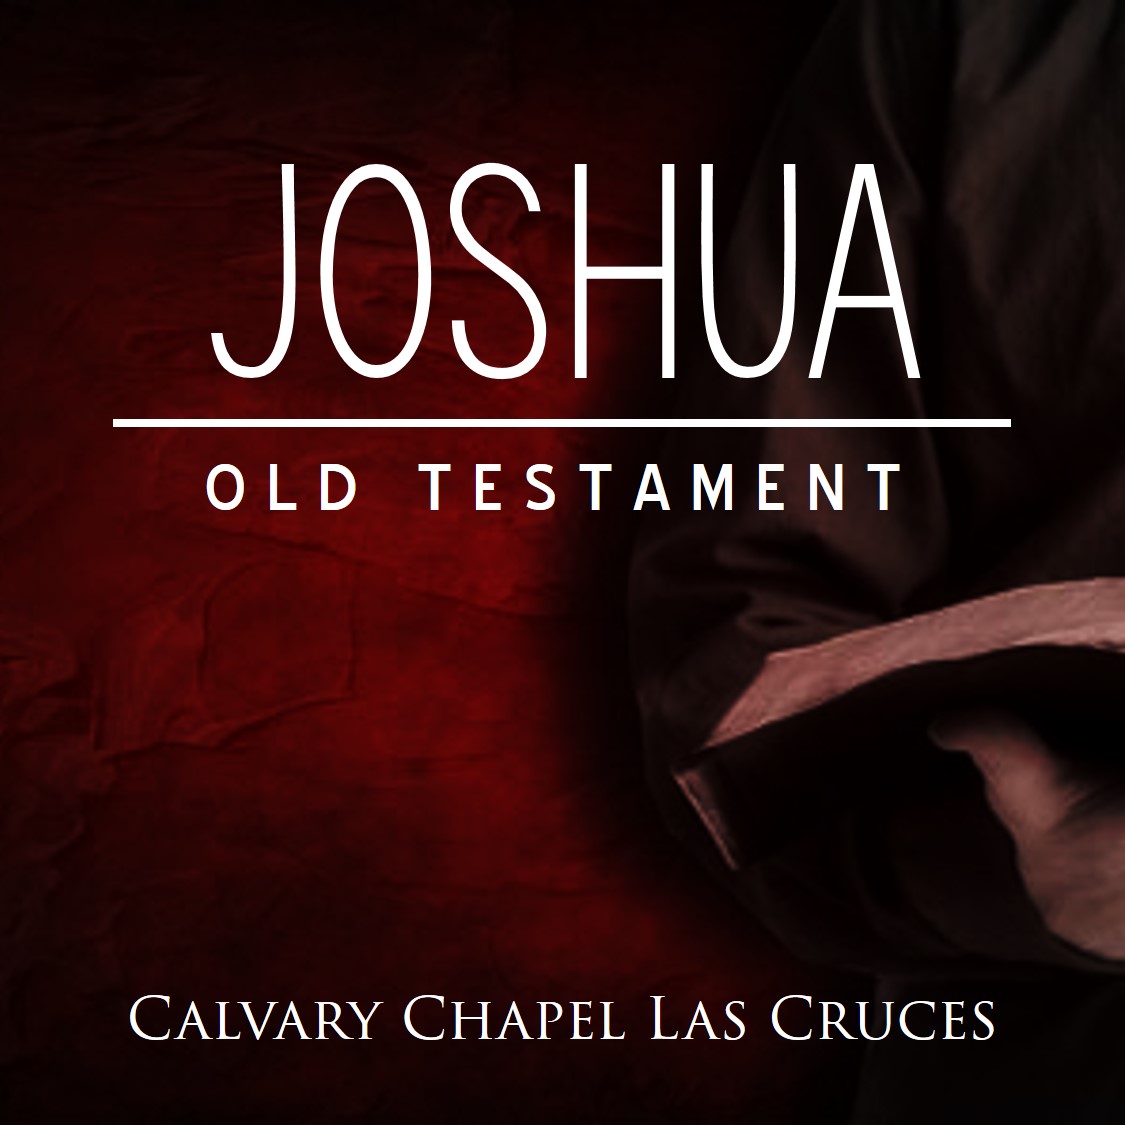 Joshua 1 - ”Introduction and the Promised Land”